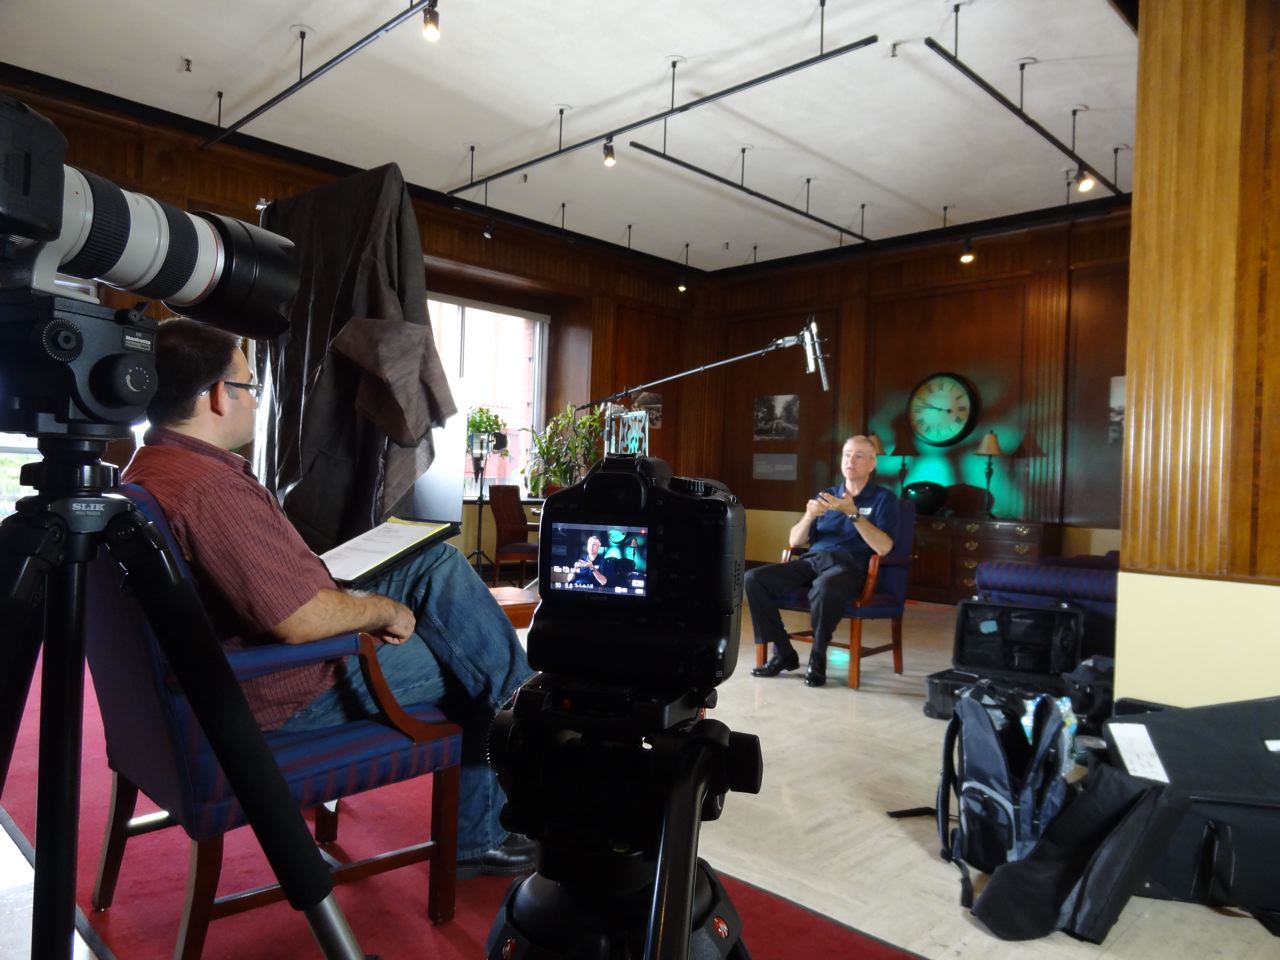 Producing/Interviewing on site at Kodak in George Eastman's office building.